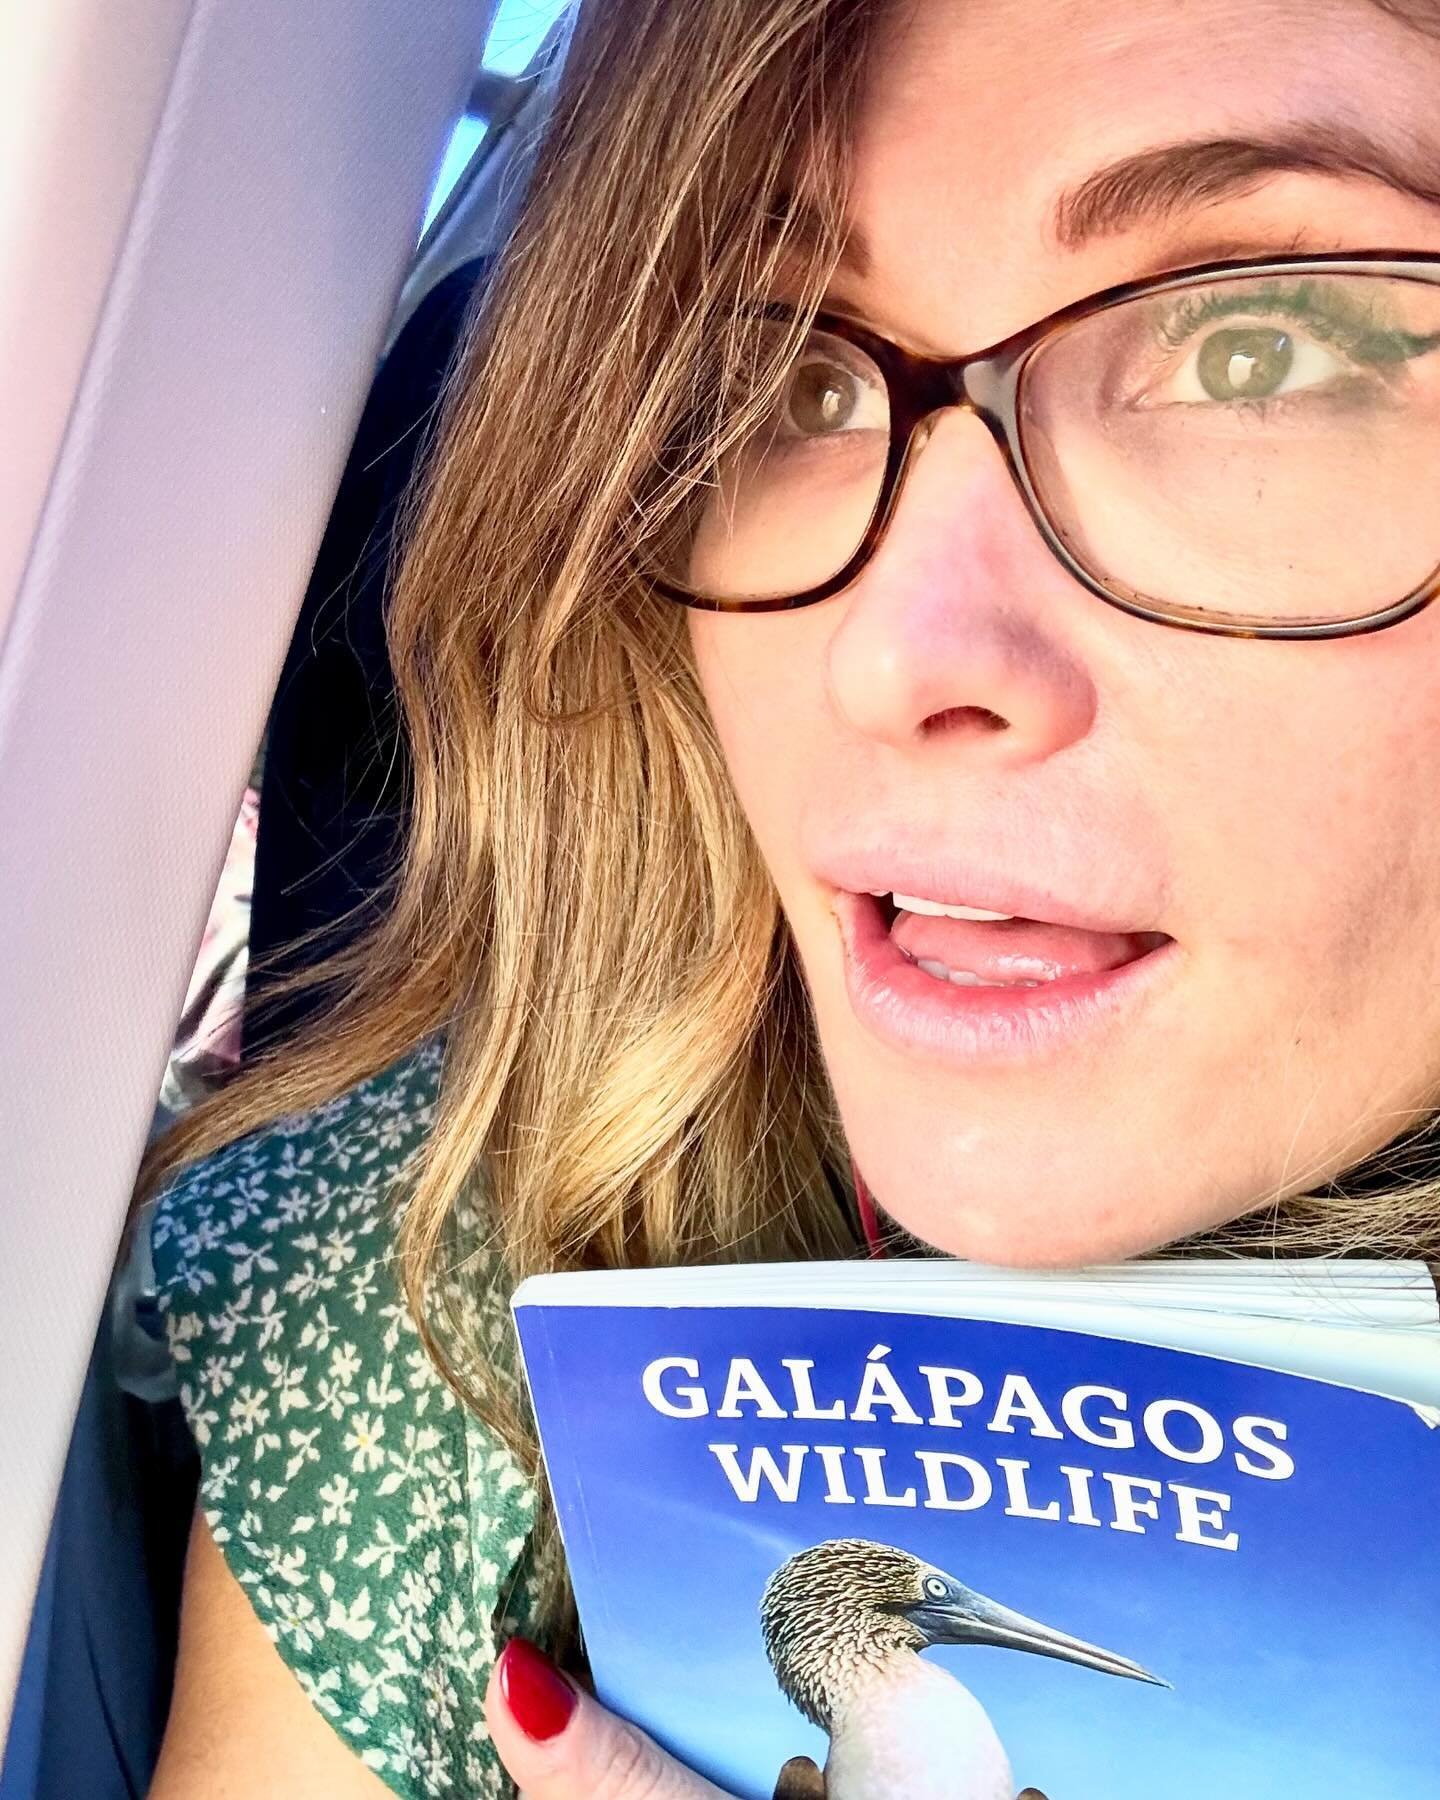 Let&rsquo;s Gal&aacute;pagooooo!
Day 1: En route to the Gal&aacute;pagos! 
.
On February 26th, 2024 I left my home in Burbank, California to host a trip to the Gal&aacute;pagos, Ecuador. It was my first time visiting the archipelago (and South Americ